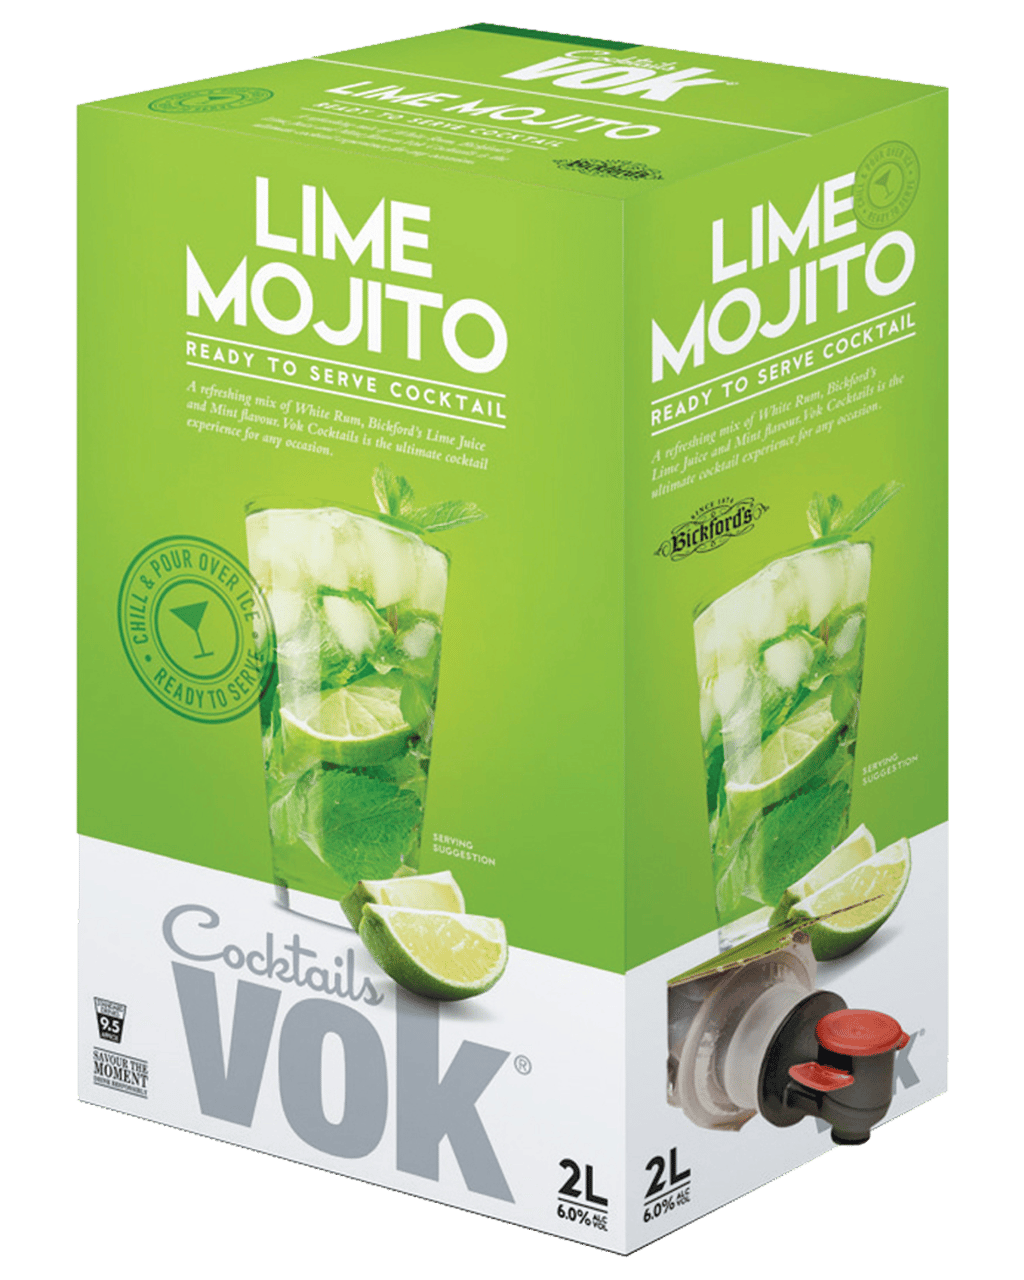 Buy Vok Cocktails Lime Mojito 2l Online or Near You in Australia [with Same Delivery* & Best Offers] - Dan Murphy's